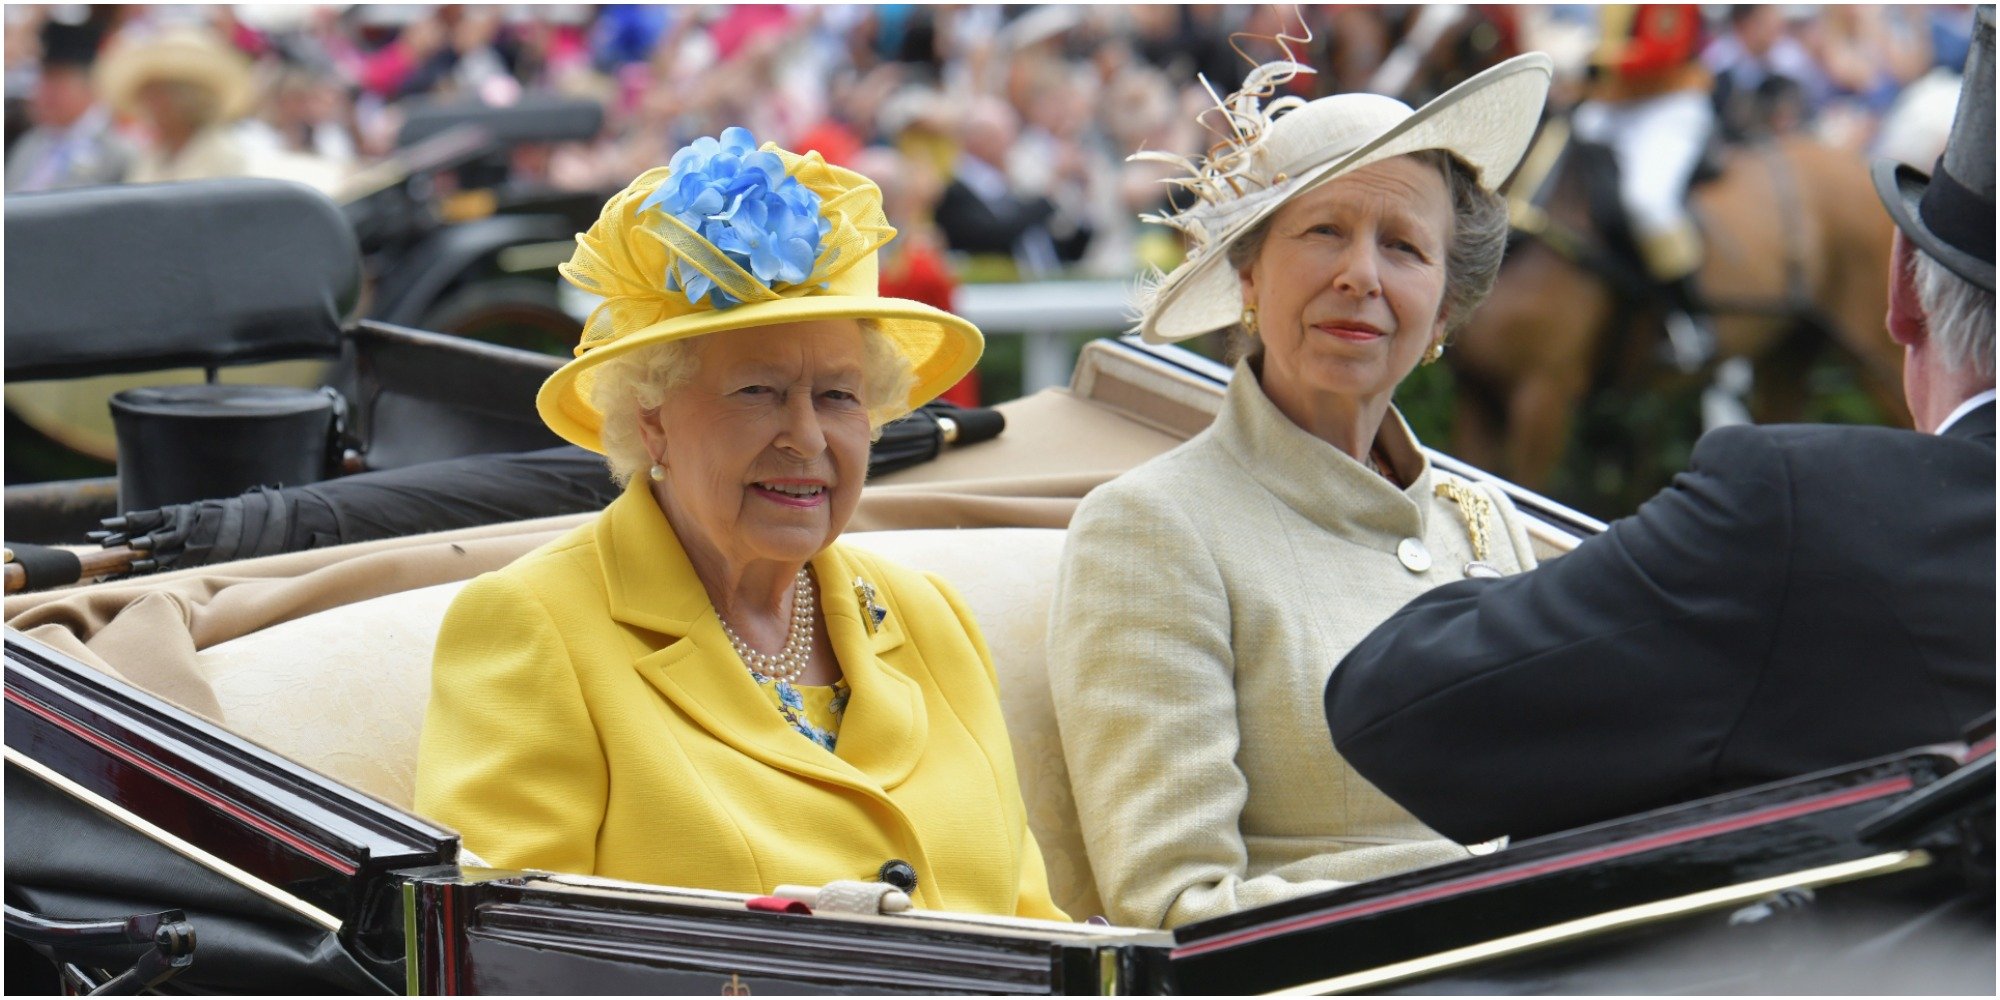 Queen Elizabeth and Princess Anne ride in a horse drawn carriage.